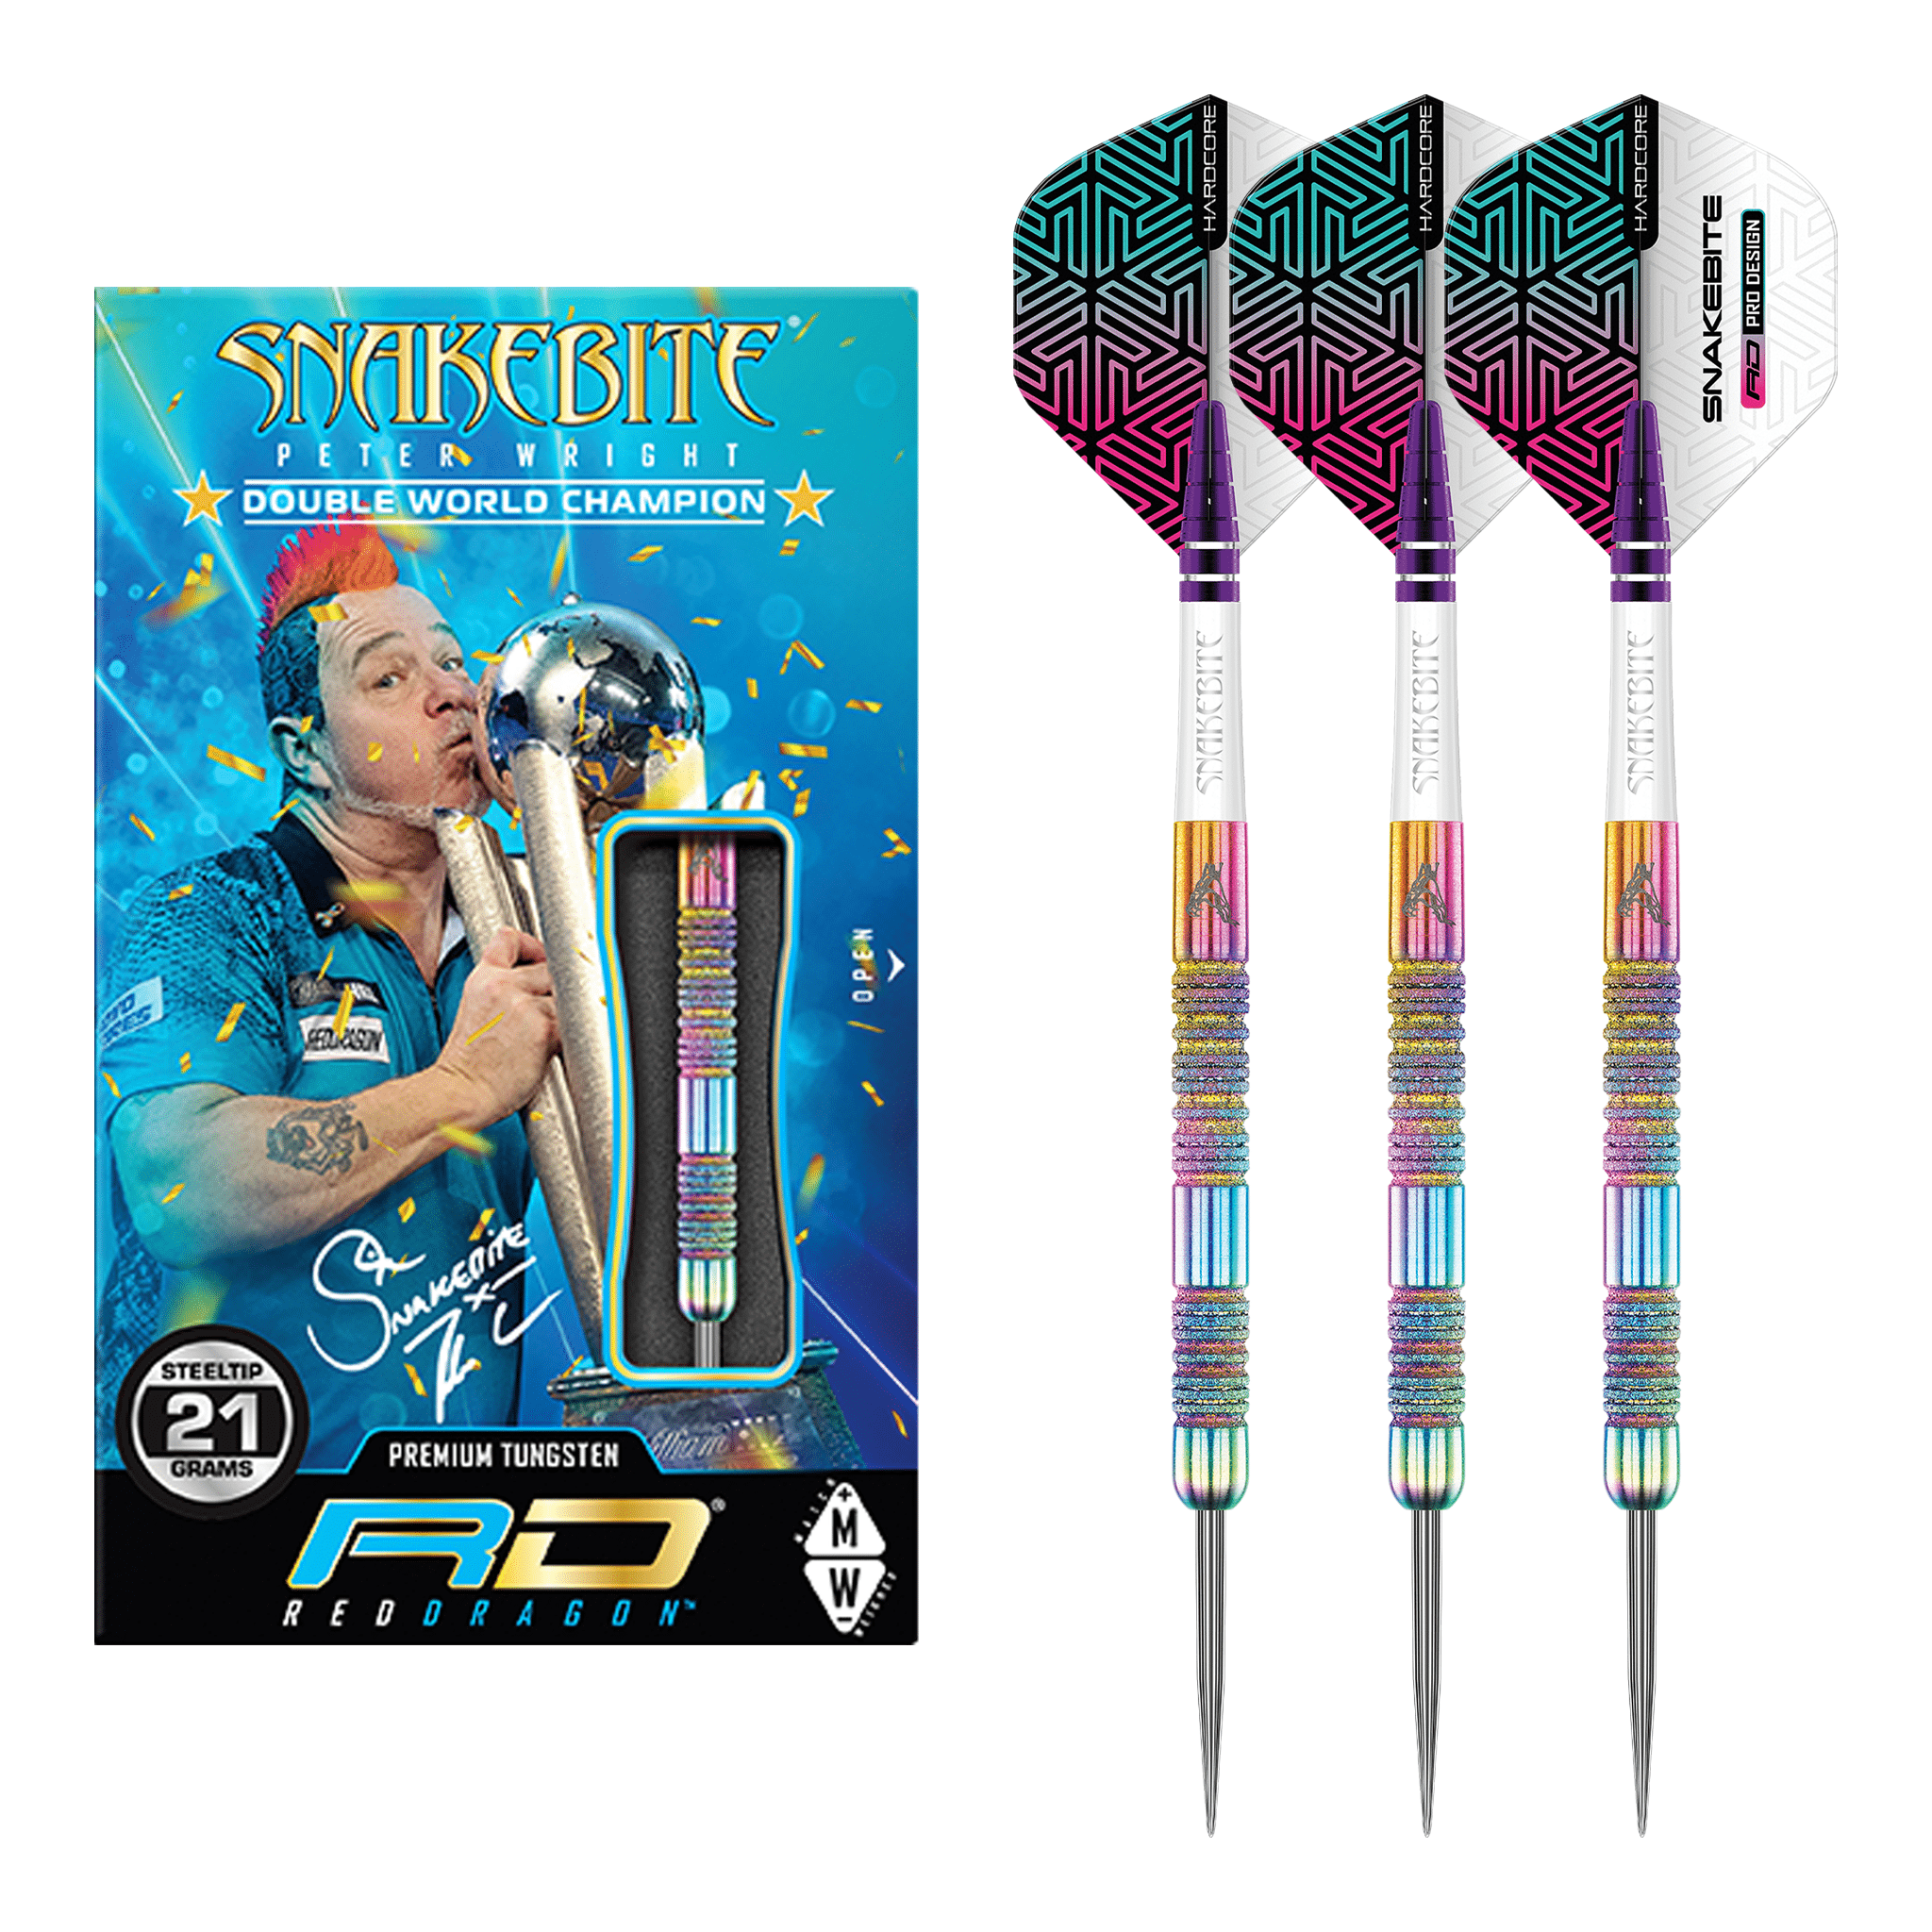 Red Dragon Peter Wright Diamond Fusion Spectron Special Edition - 90% Tungsten Steel Tip Darts 21 Grams Darts